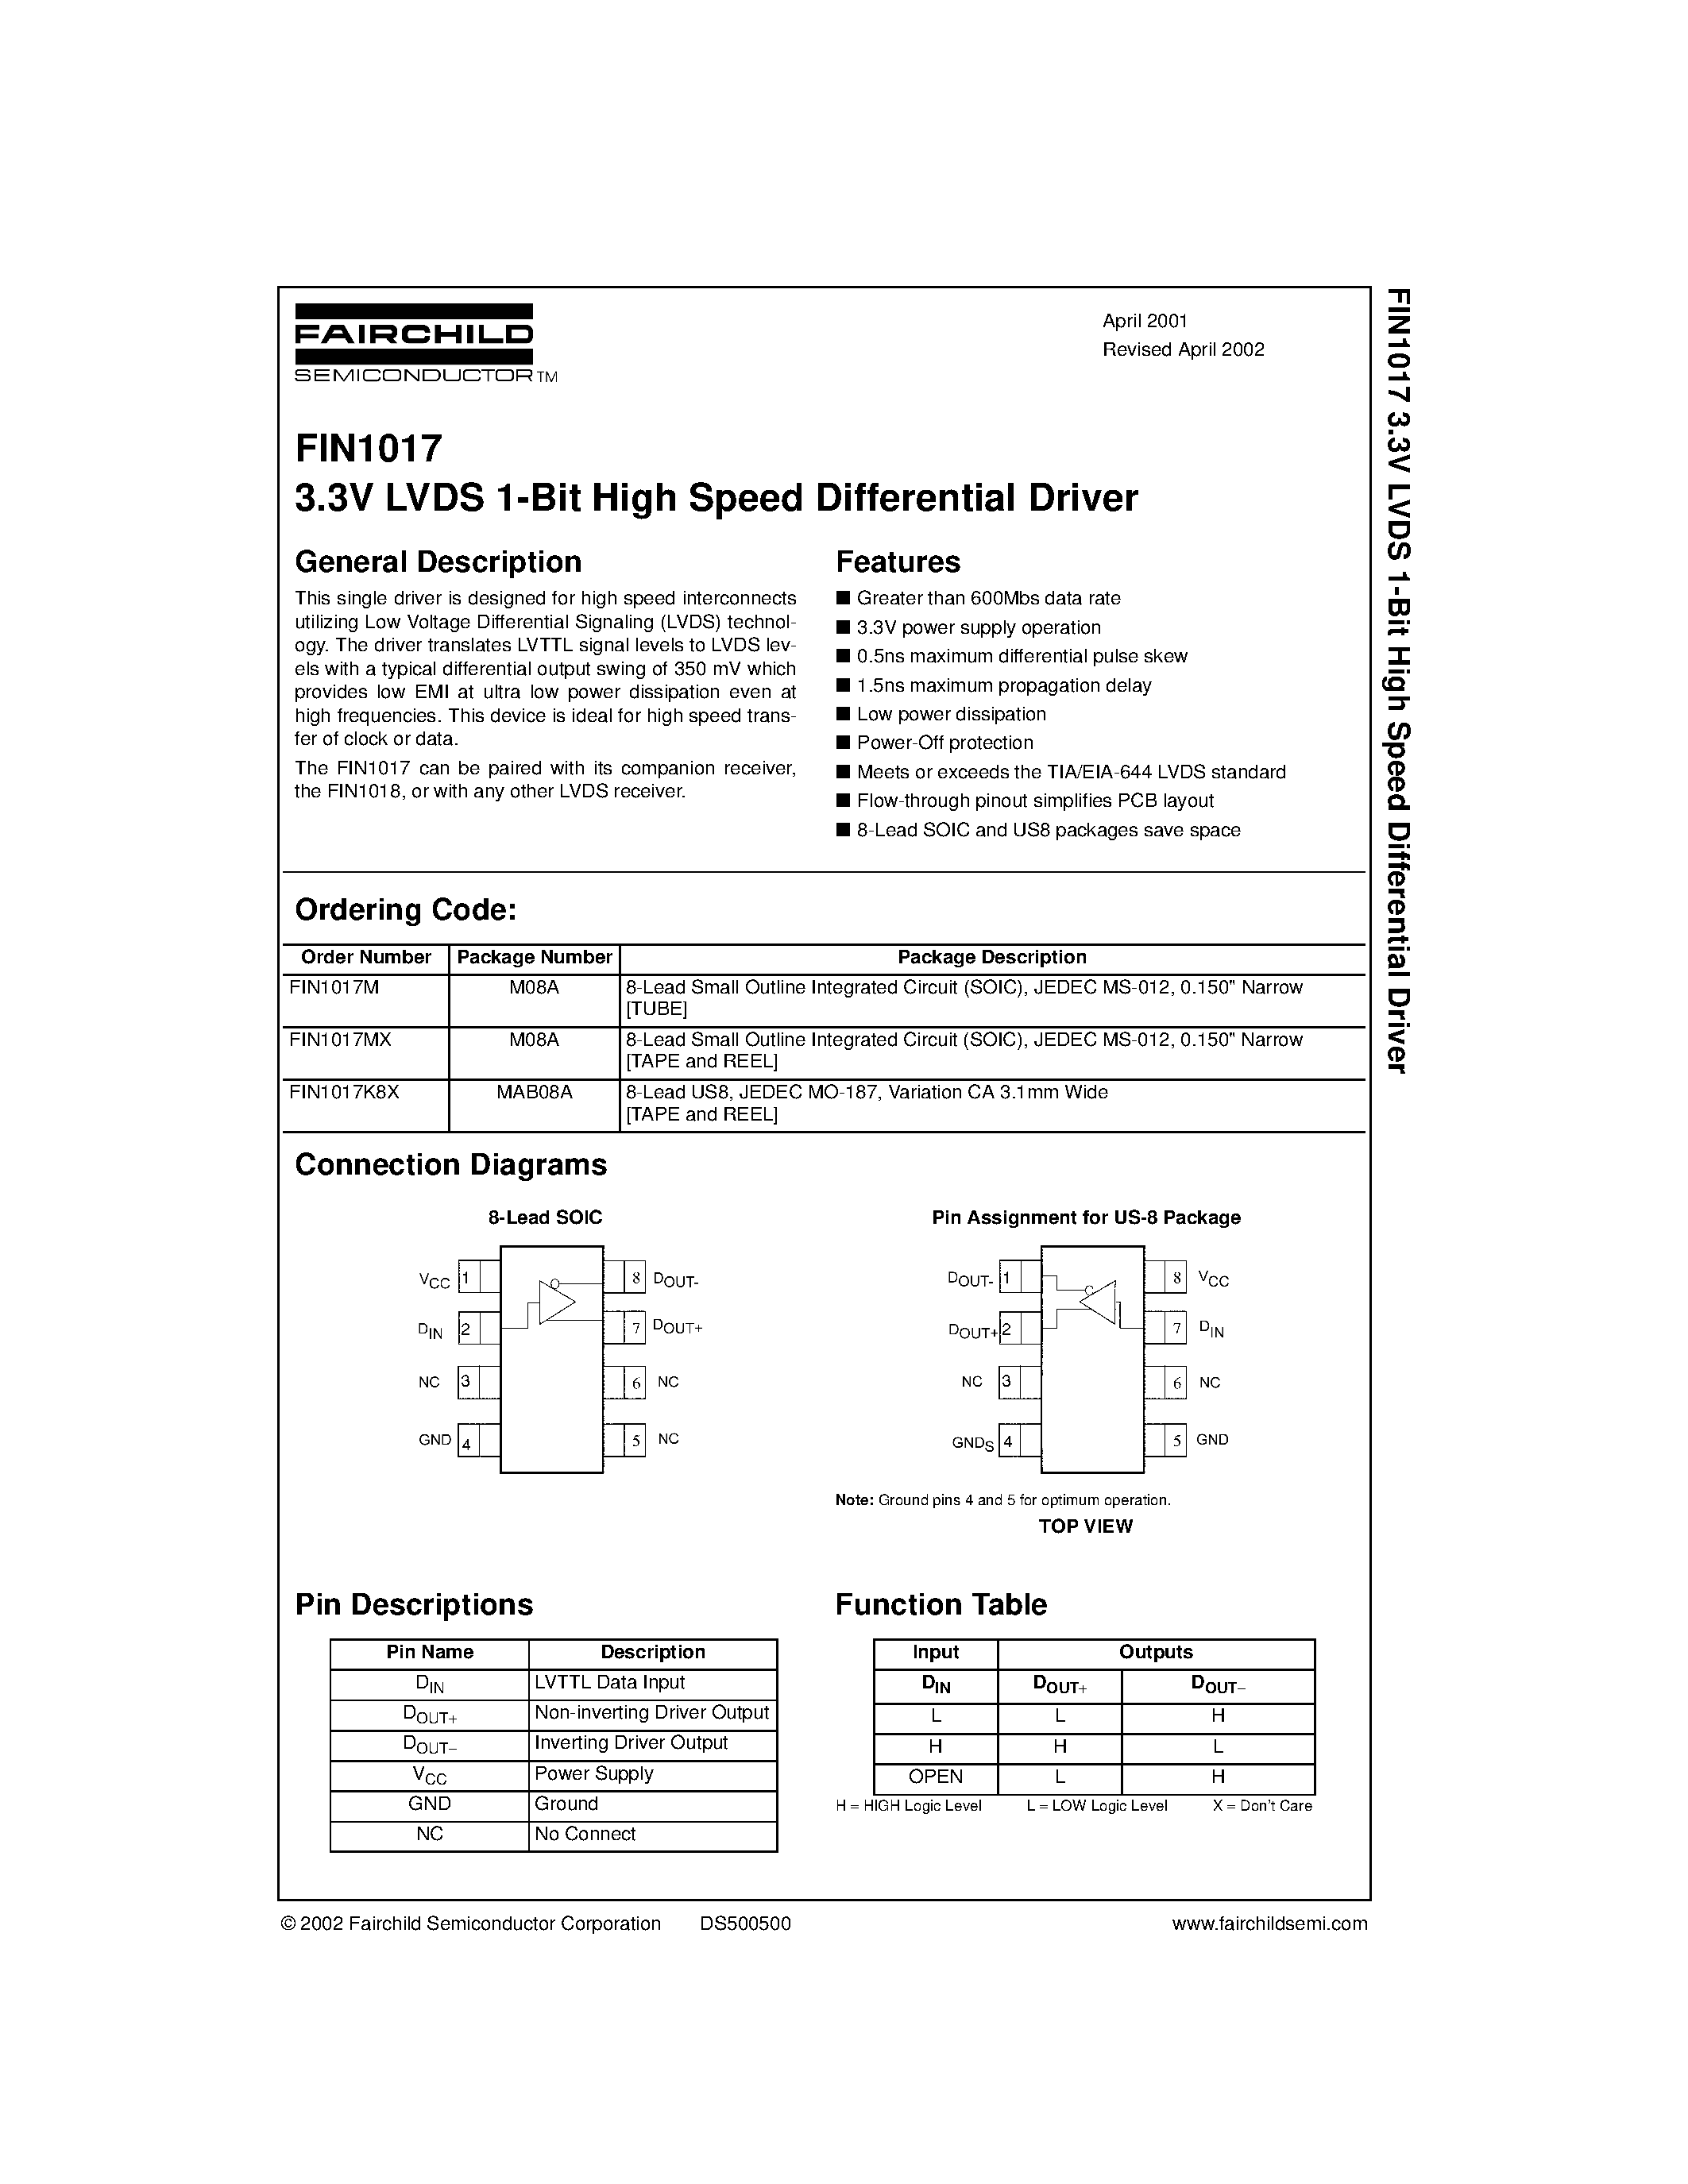 Datasheet FIN1017M - 3.3V LVDS 1-Bit High Speed Differential Driver page 1